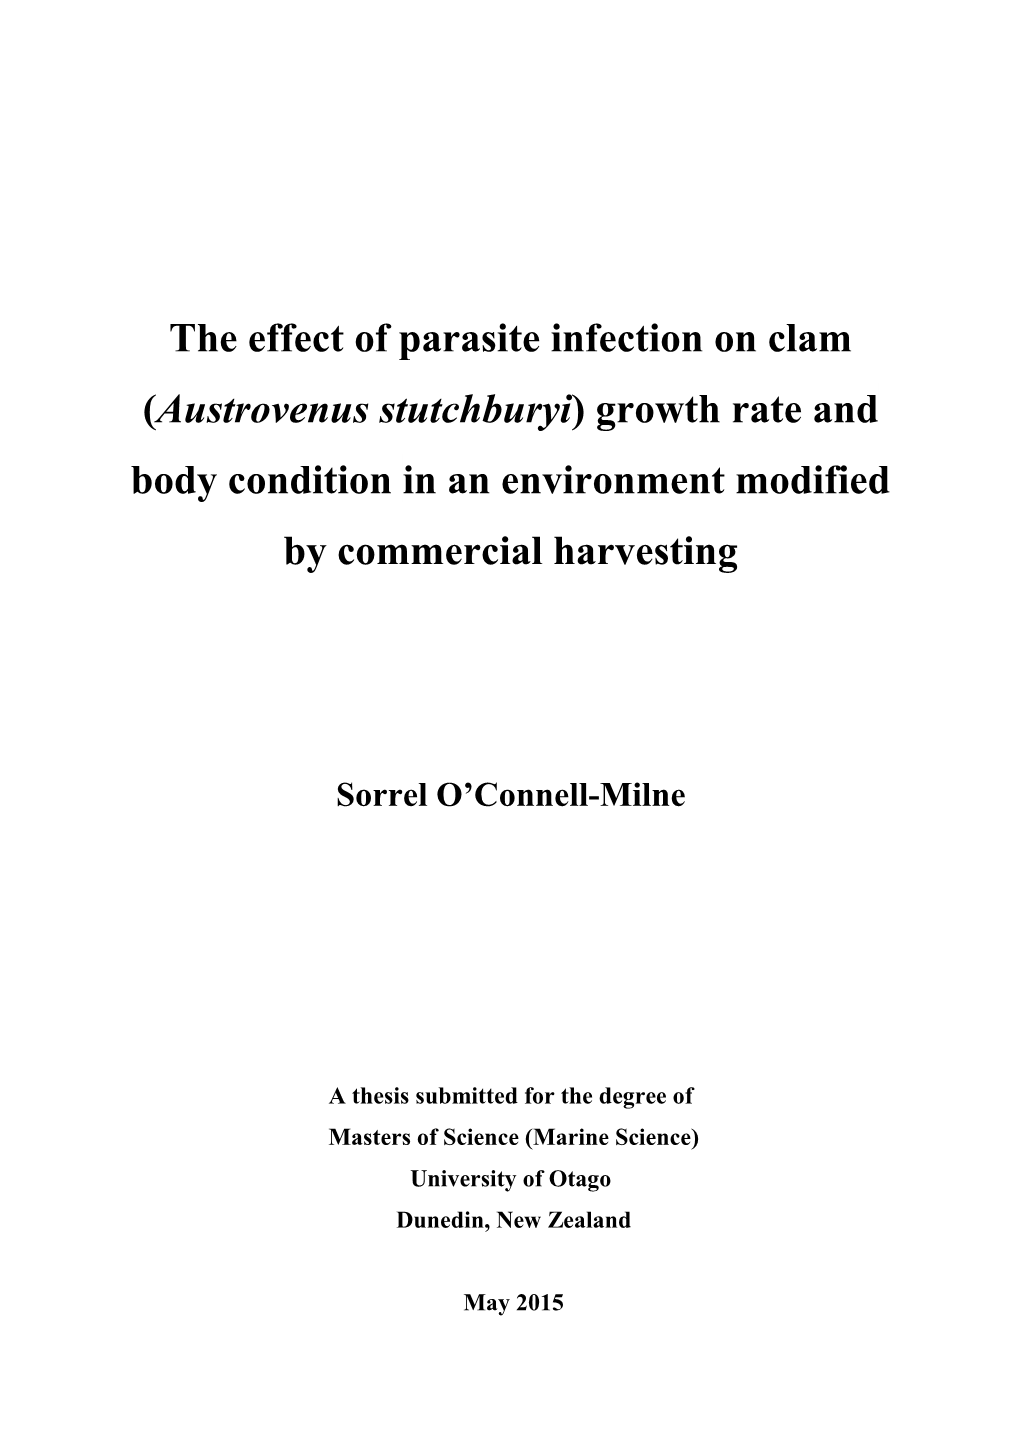 The Effect of Parasite Infection on Clam (Austrovenus Stutchburyi) Growth Rate and Body Condition in an Environment Modified by Commercial Harvesting